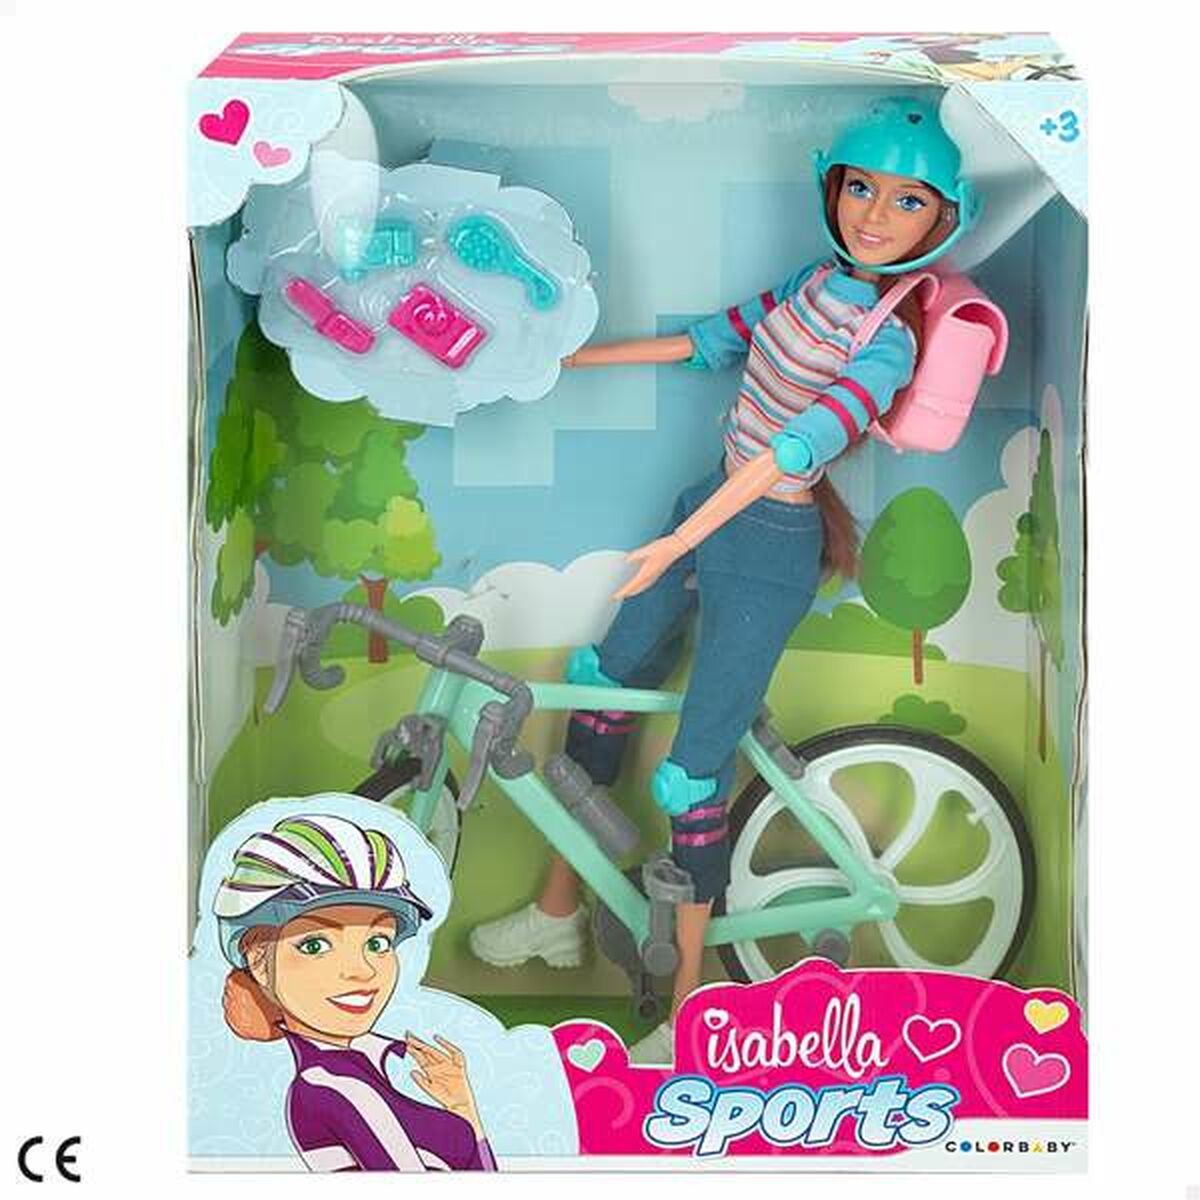 Figurine d’action Colorbaby Isabella